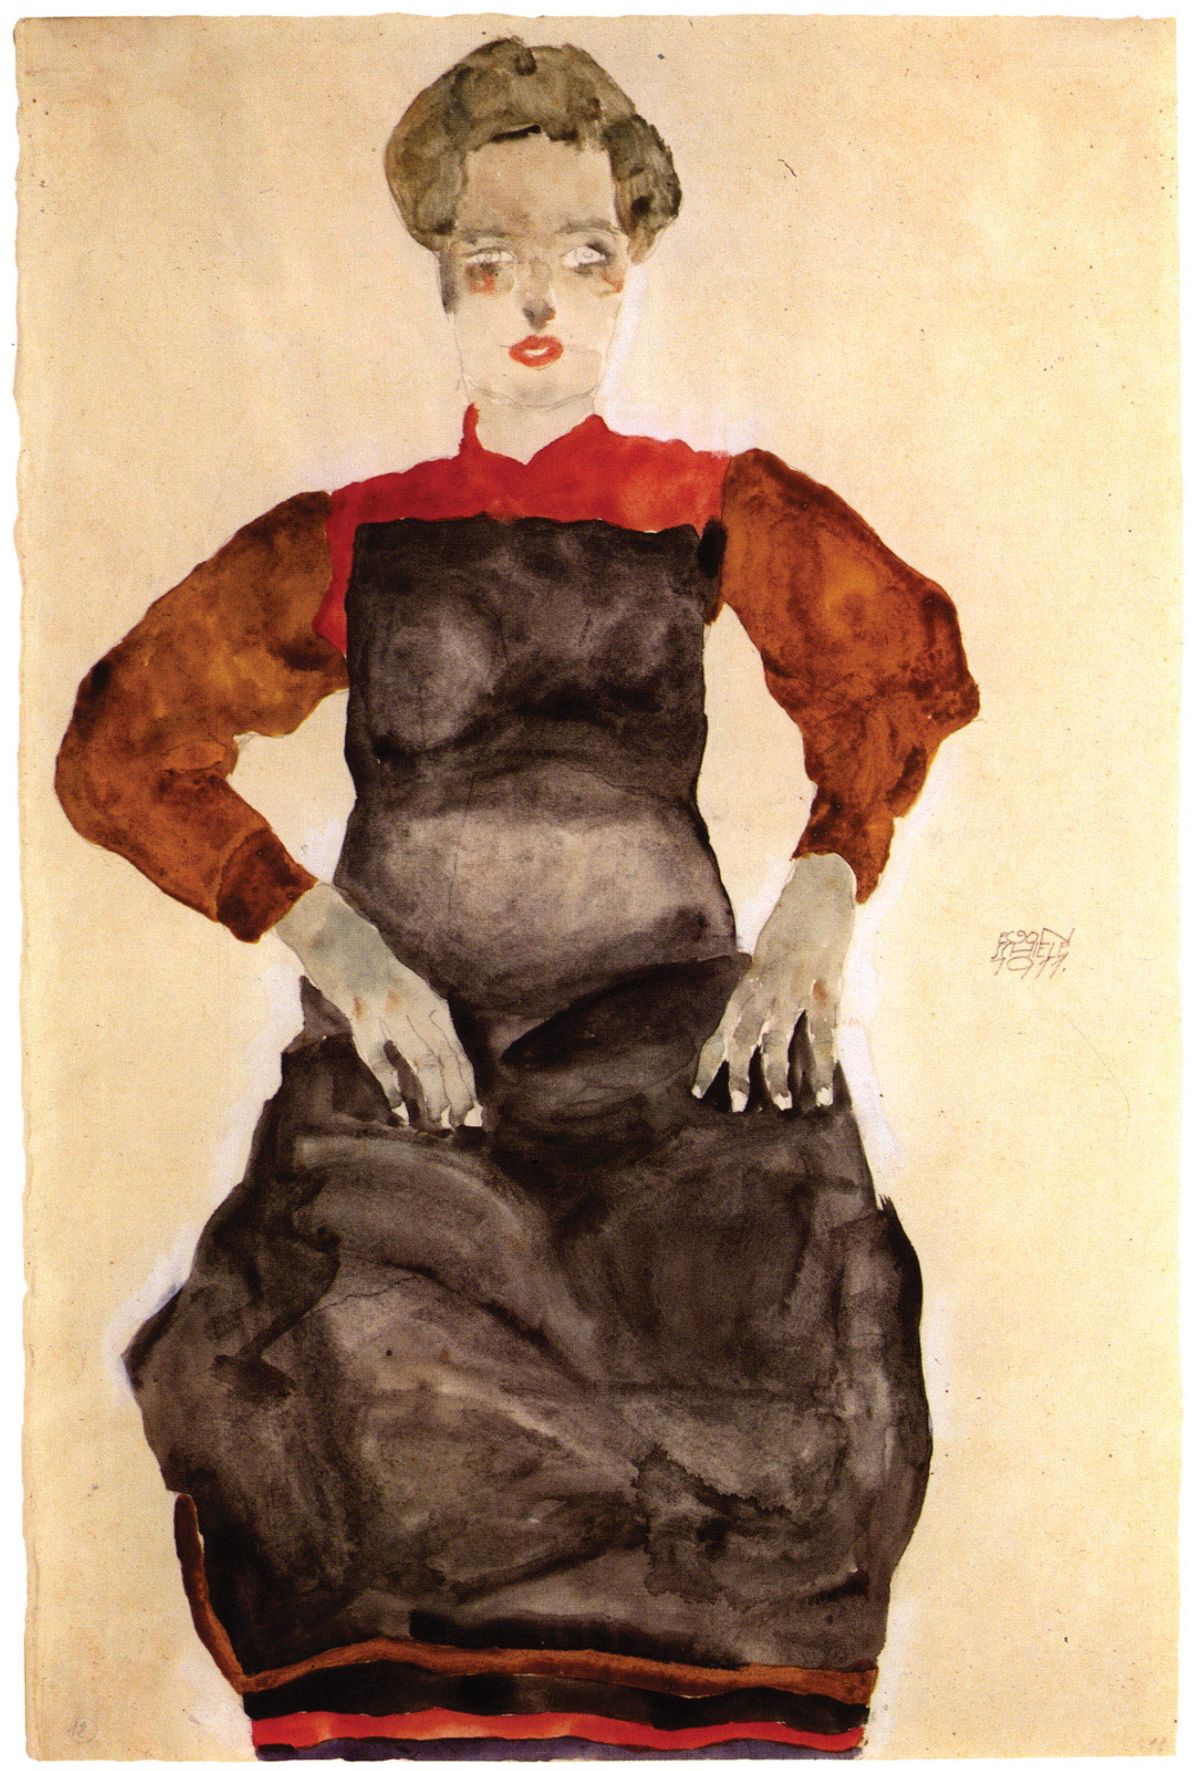 The disputed Woman in a Black Pinafore (1911) by Egon Schiele. At the request of three dealers, lostart.de removed 63 works by Schiele claimed by the heirs of Fritz Grünbaum, who perished at Dachau Courtesy of Collection Grünbaum